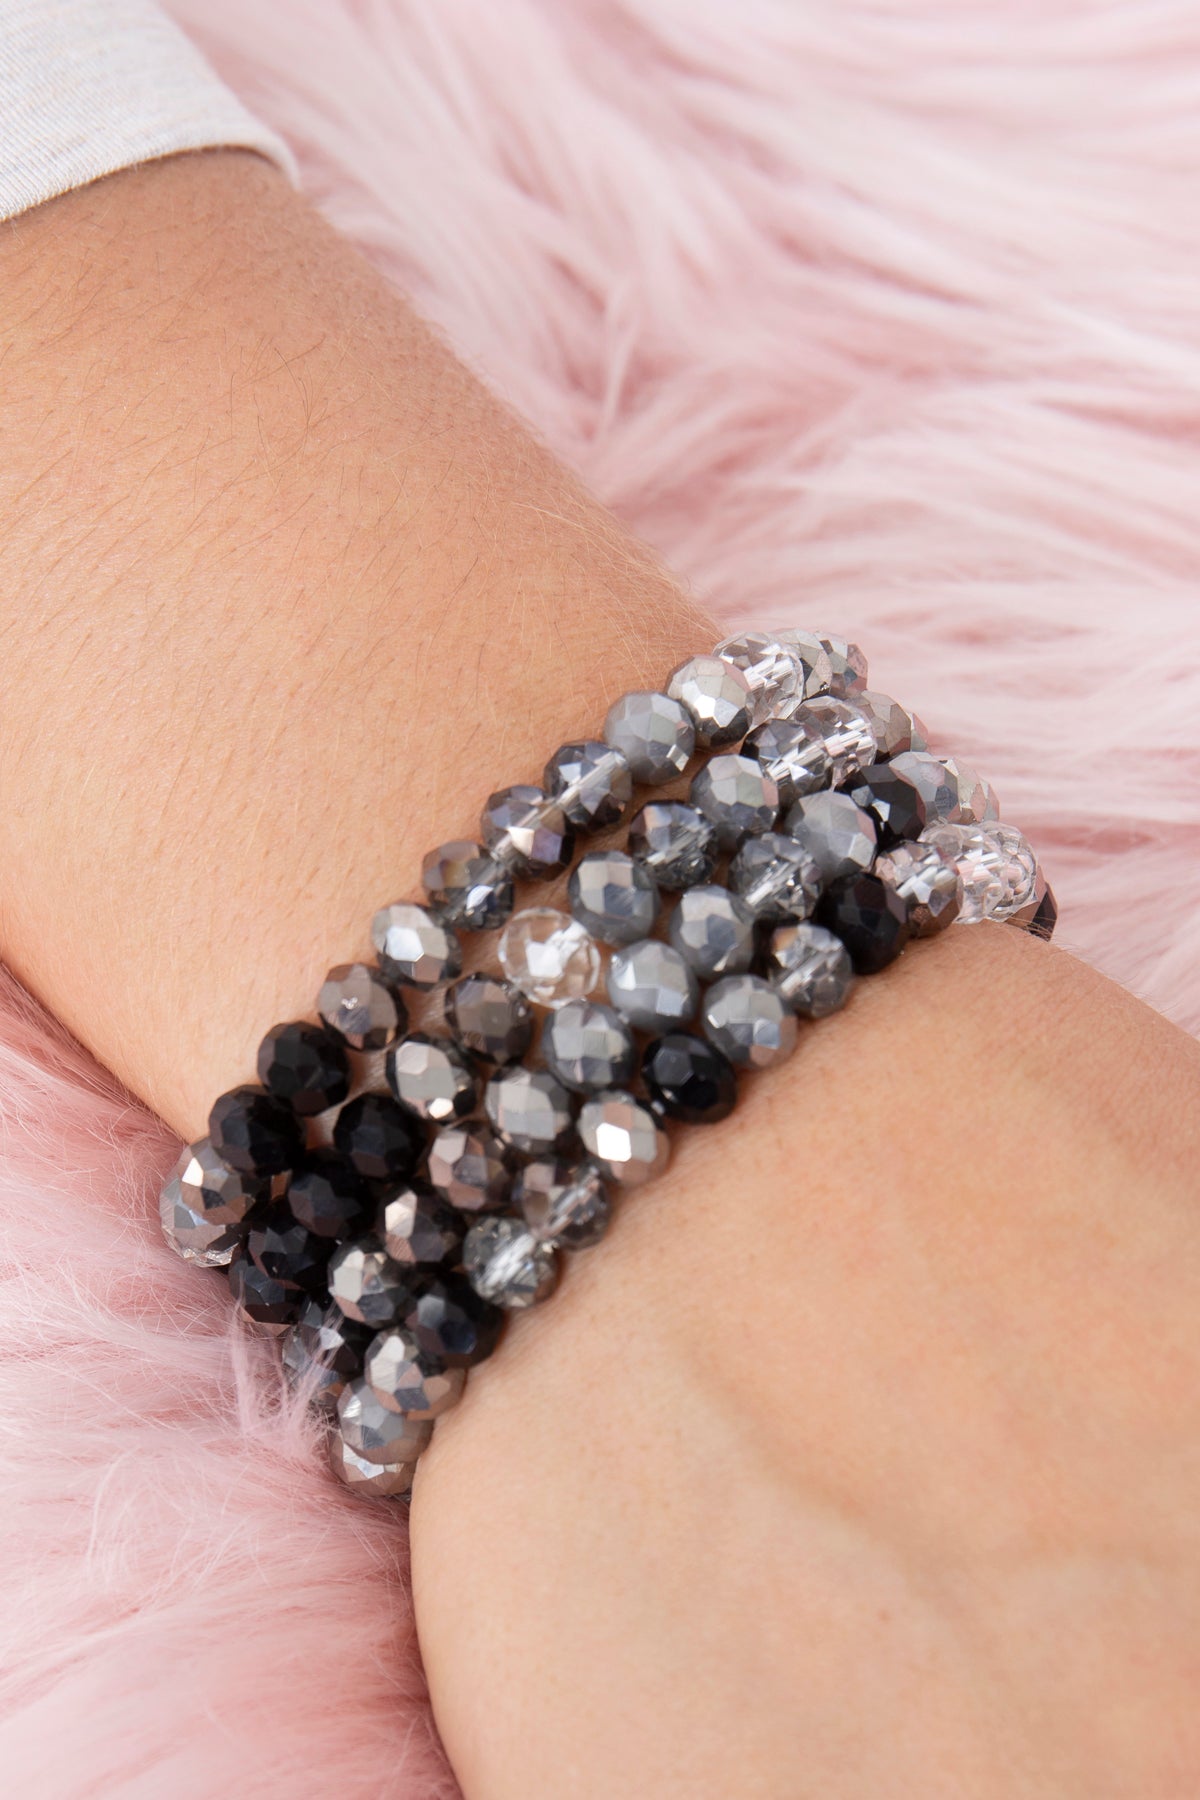 RONDELLE BEADS 4 LAYERED STACKABLE STRETCH BRACELET SET (NOW $ 2.00 ONLY!)